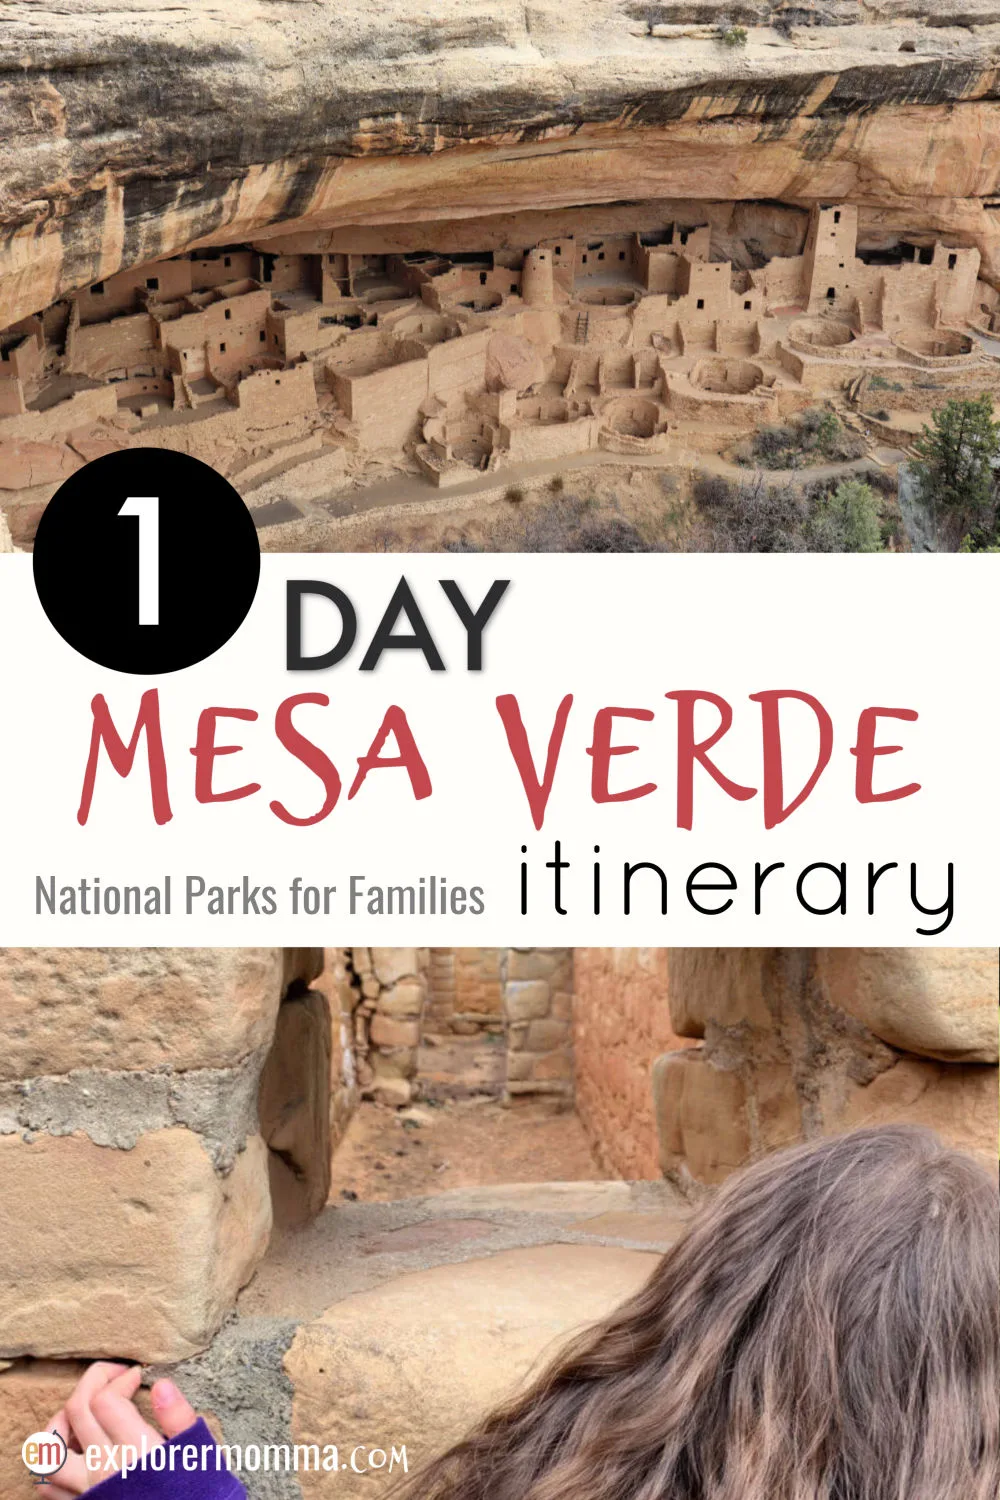 Visit the American cliff castles for yourself with a 1 day Mesa Verde map itinerary. Pressed for time? Follow the map and advice for a fun-filled educational day you won't want to miss. Family vacation or a day trip from Durango, Colorado. #familytravel #mesaverde